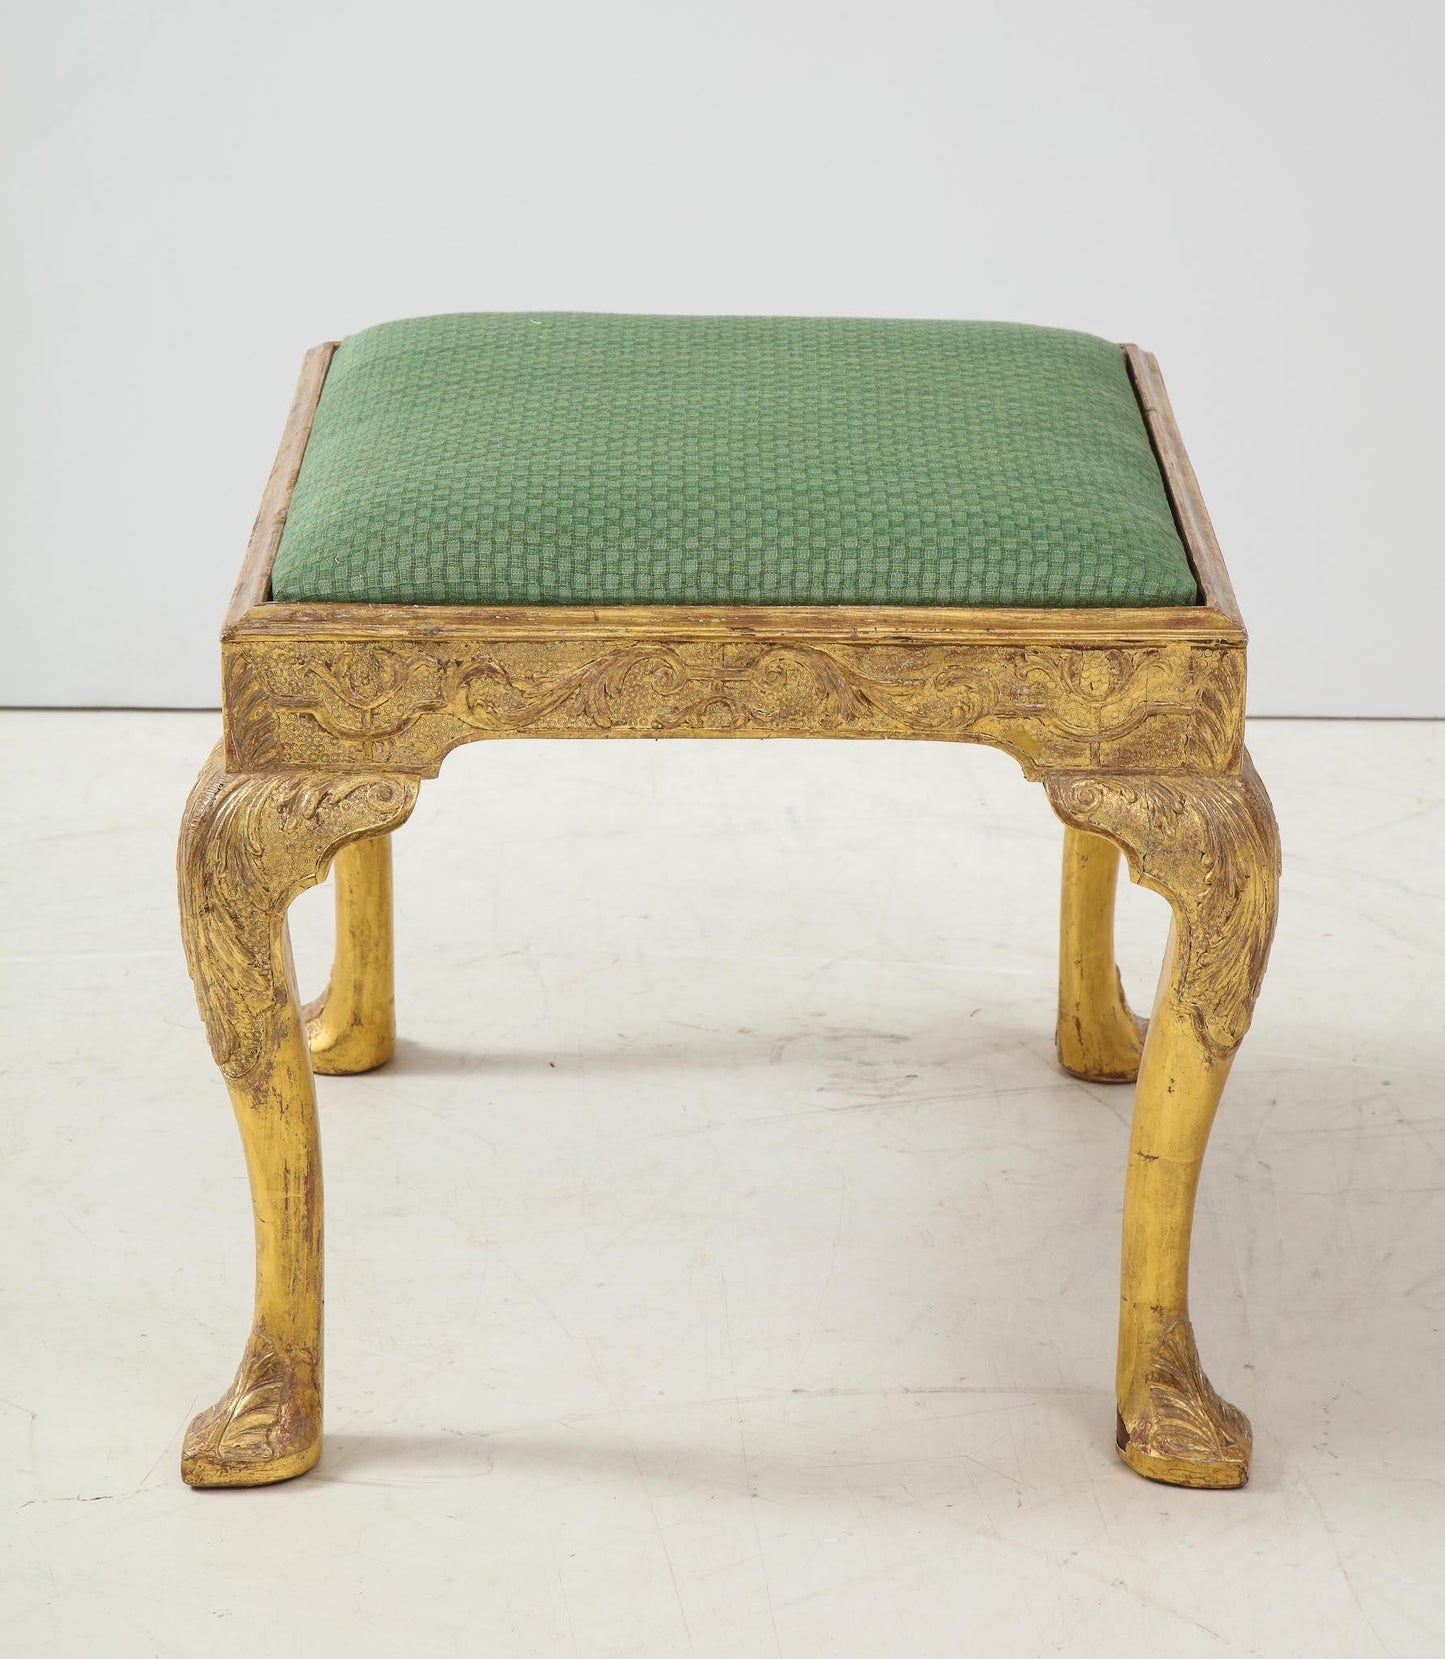 Carved-Gesso-Stool-with-Drop-In-Seat-(C-1740)-13